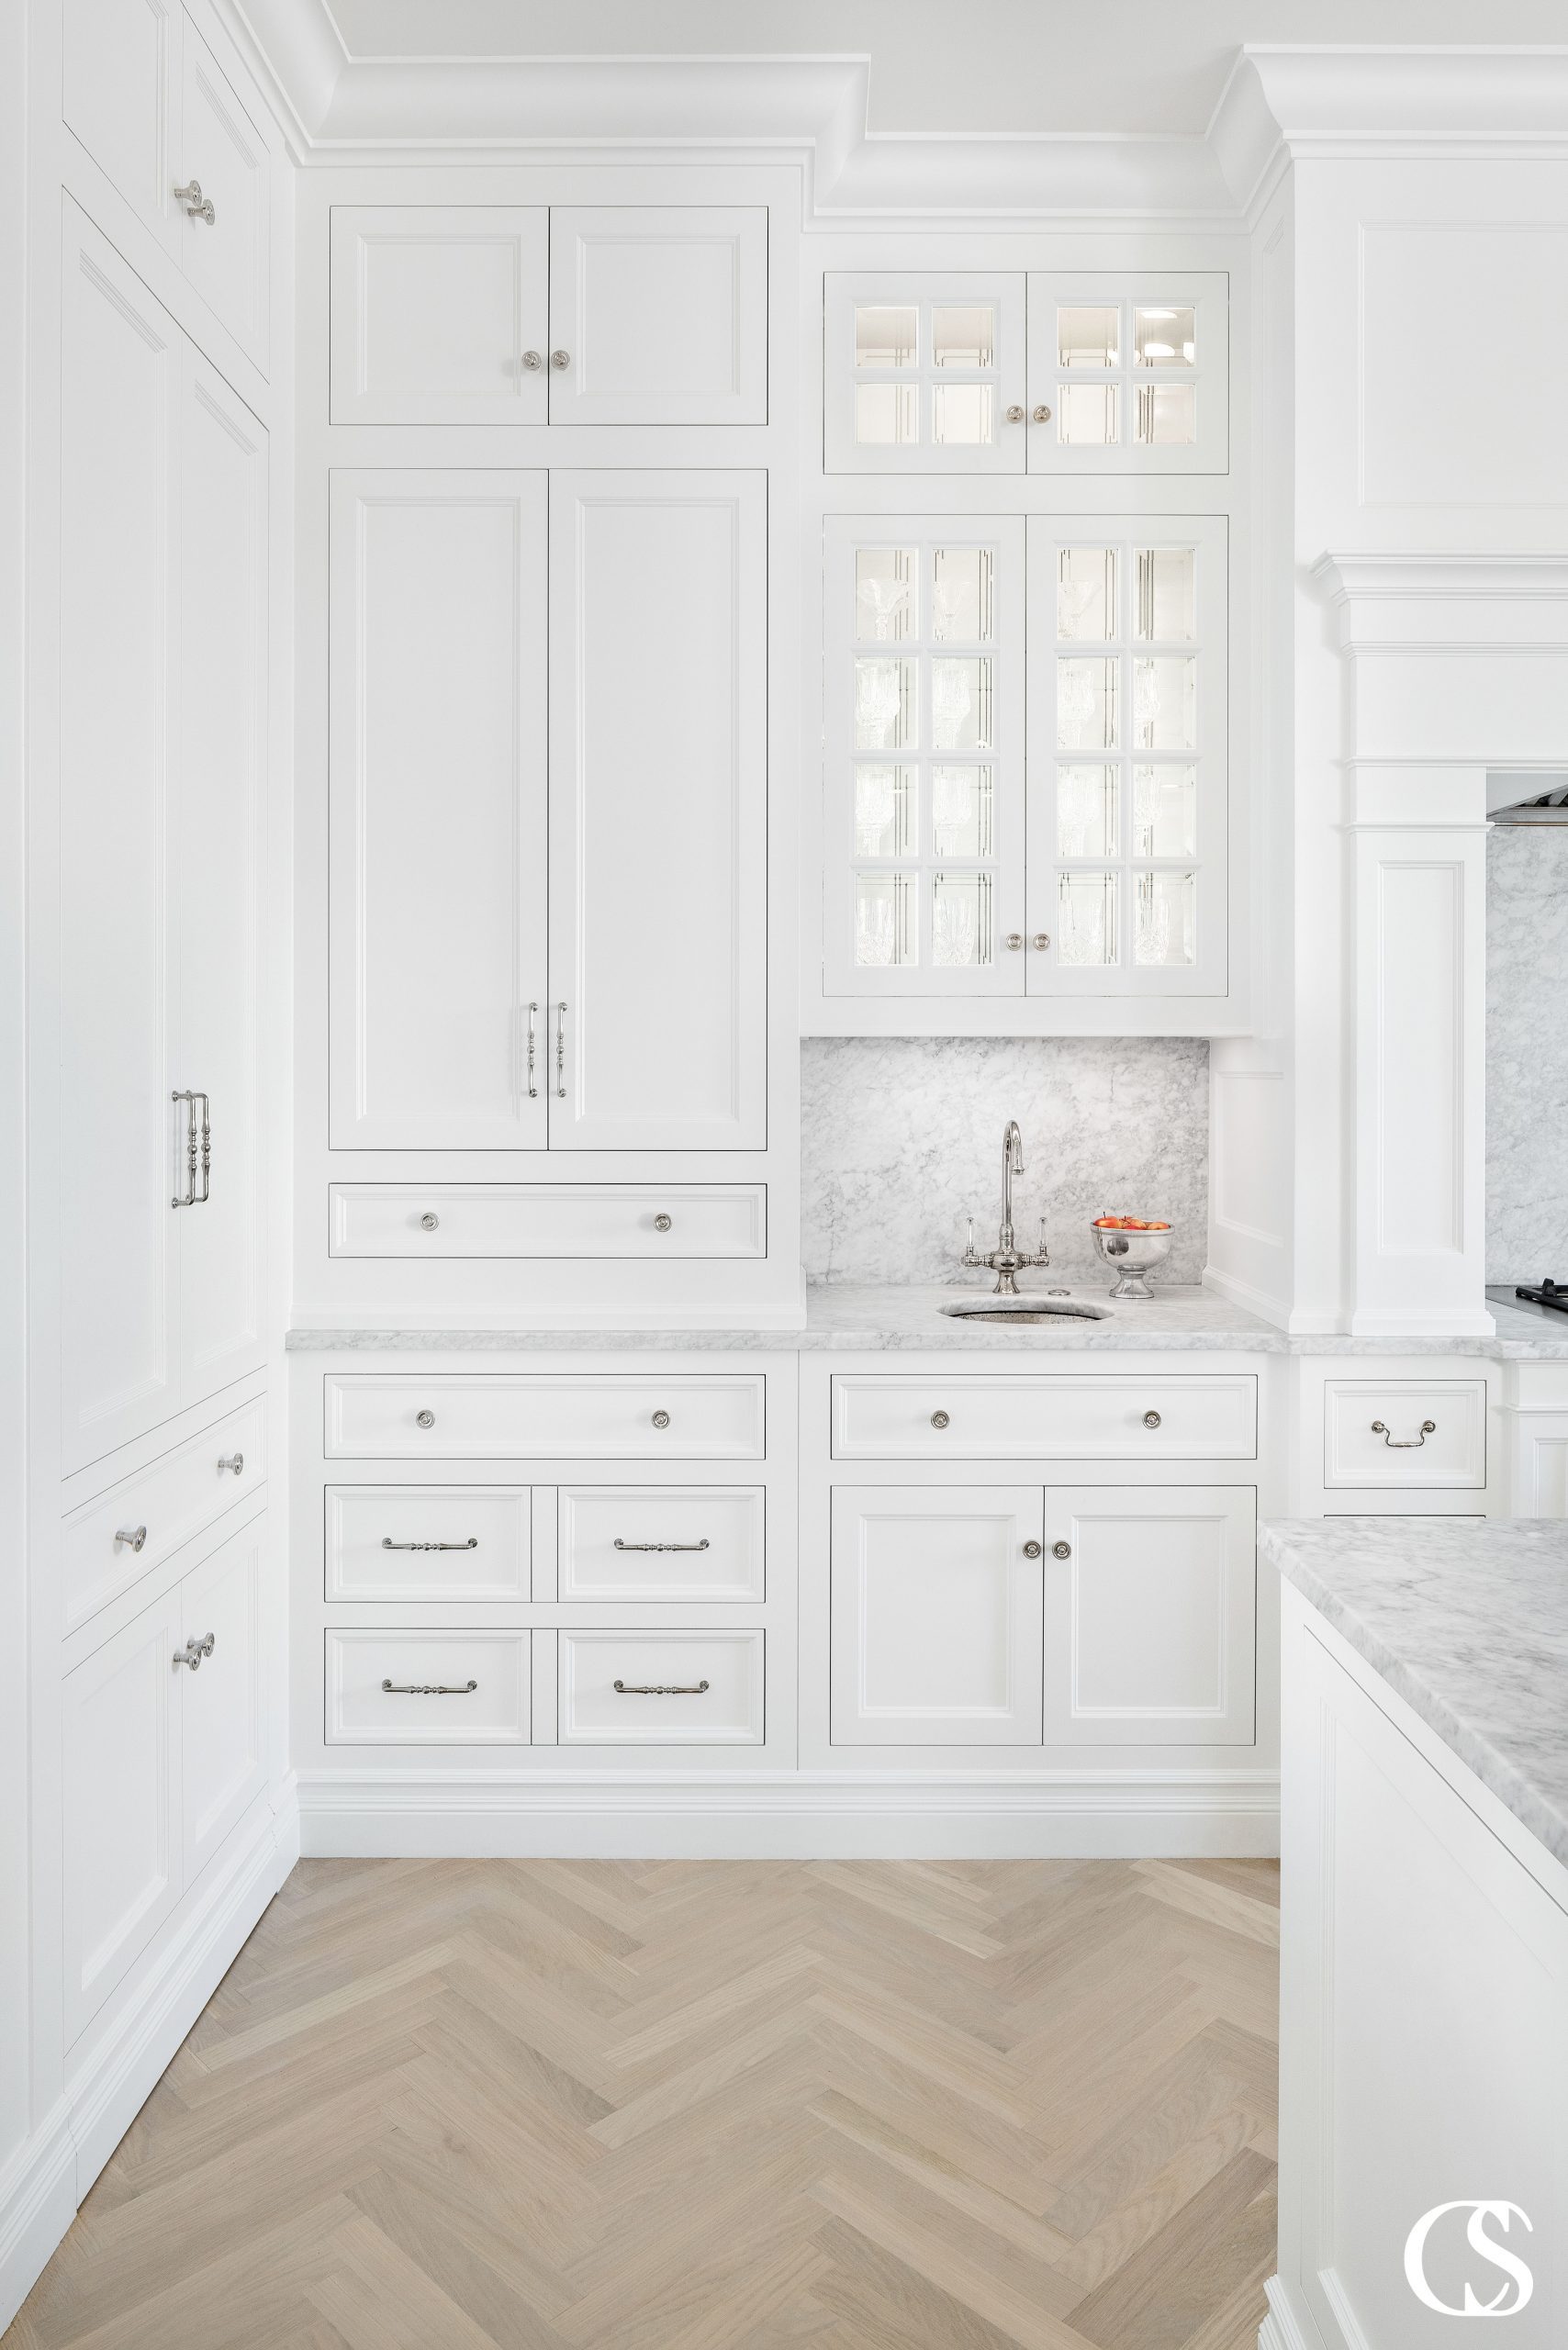 How many different styles of hardware can you spot in this custom cabinet design for the kitchen? Mixing and matching similar drawer pulls and handles is a beautiful way to spice up an all white kitchen.